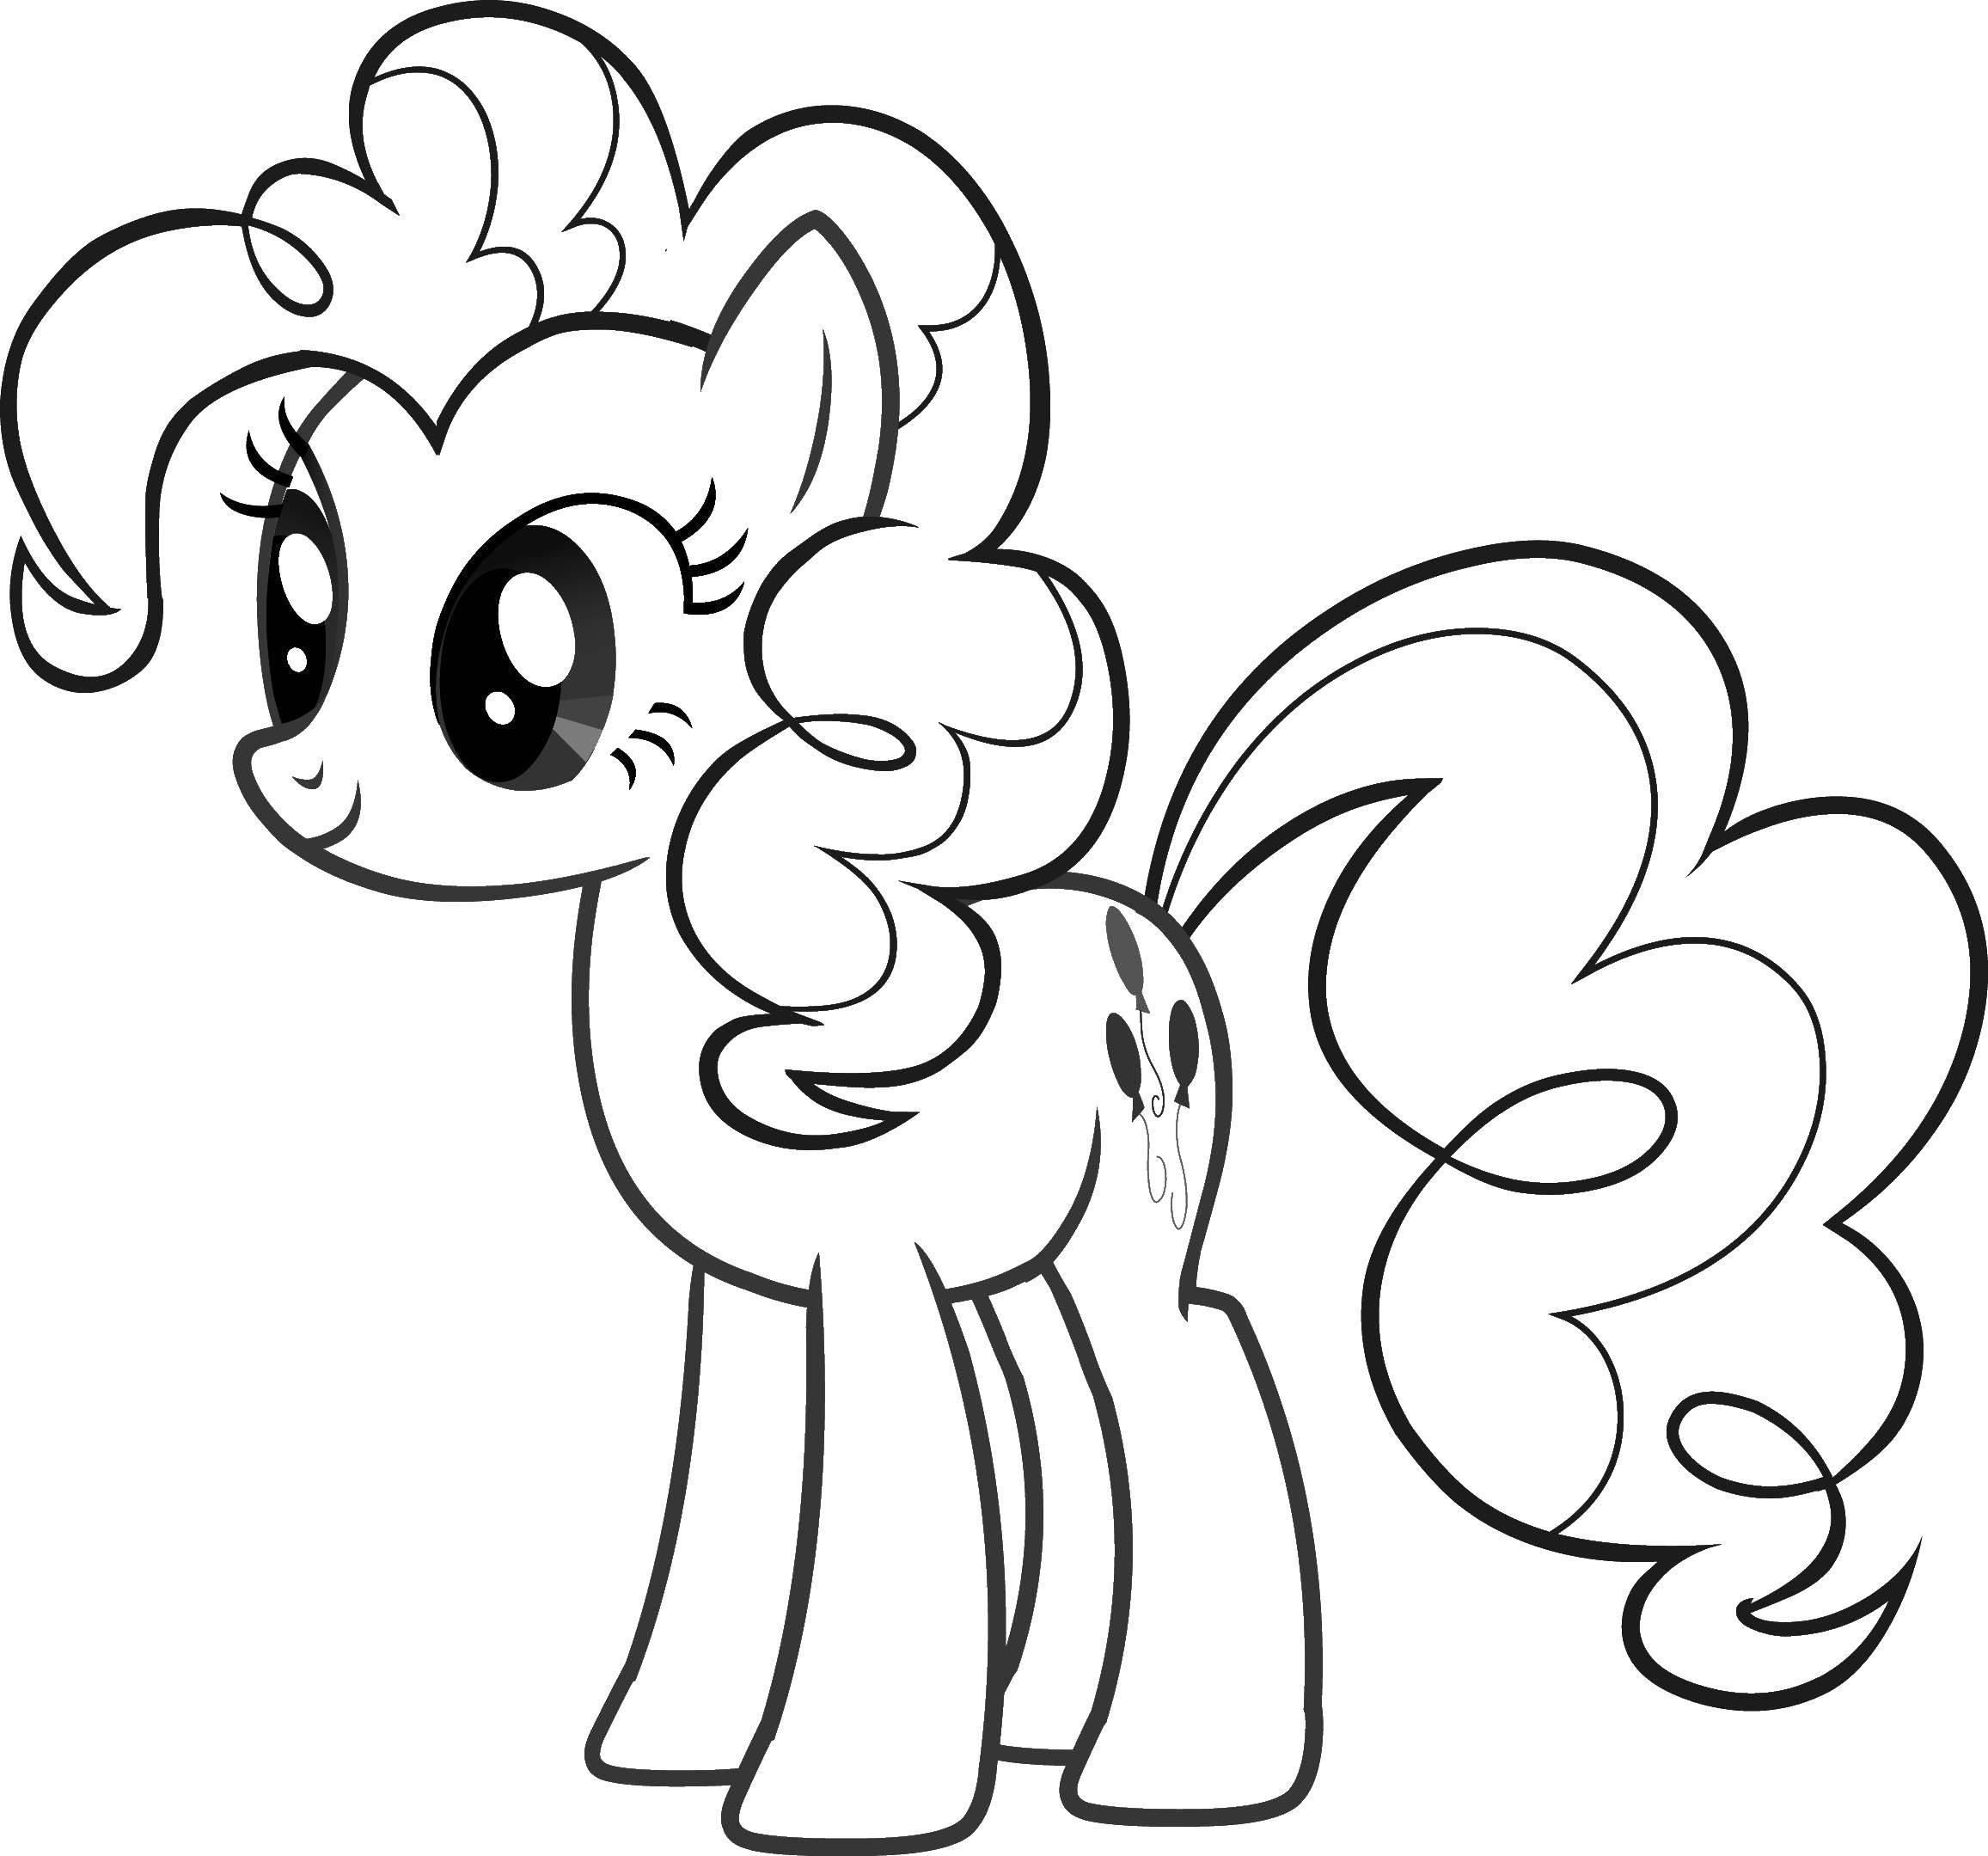 Coloring Pony. Category Ponies. Tags:  pony, horse.